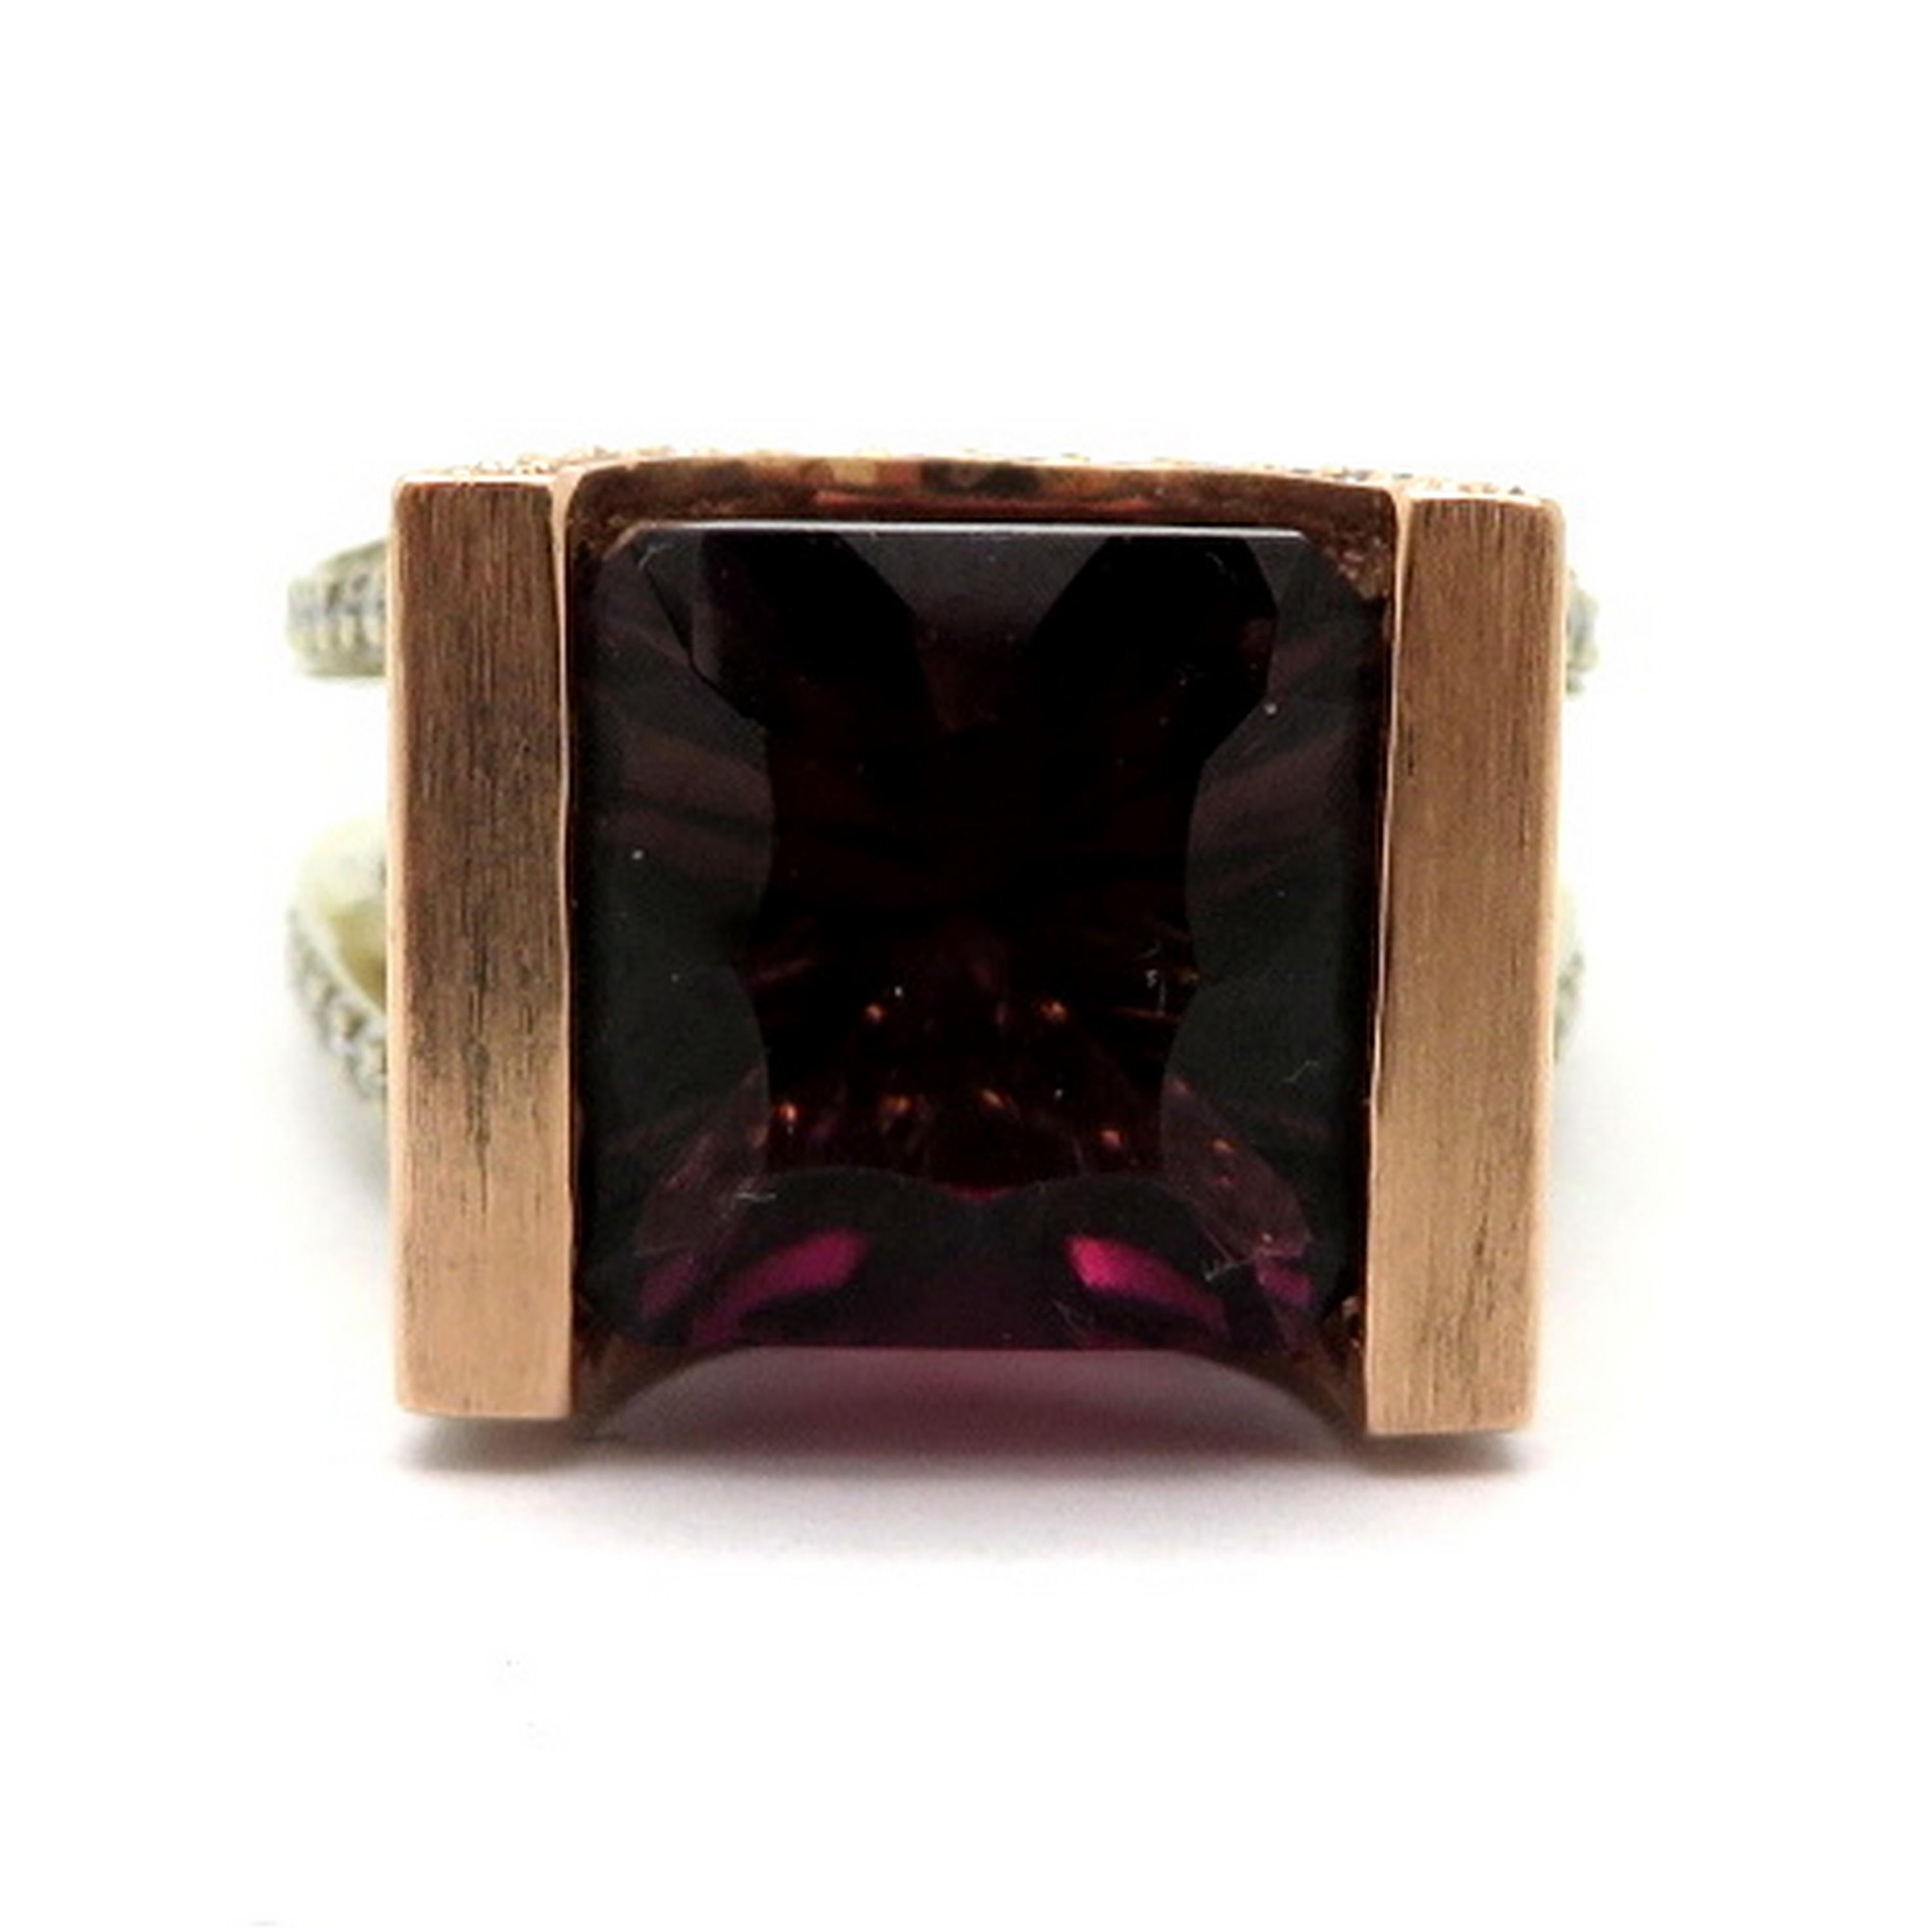 Designer Gauthier 7.00 carat tourmaline and diamond fashion statement ring. Showcasing one fancy square cut tourmaline, channel set, accented with numerous round brilliant cut diamonds, pave set, weighing approximately 2.75 carats total. Diamond